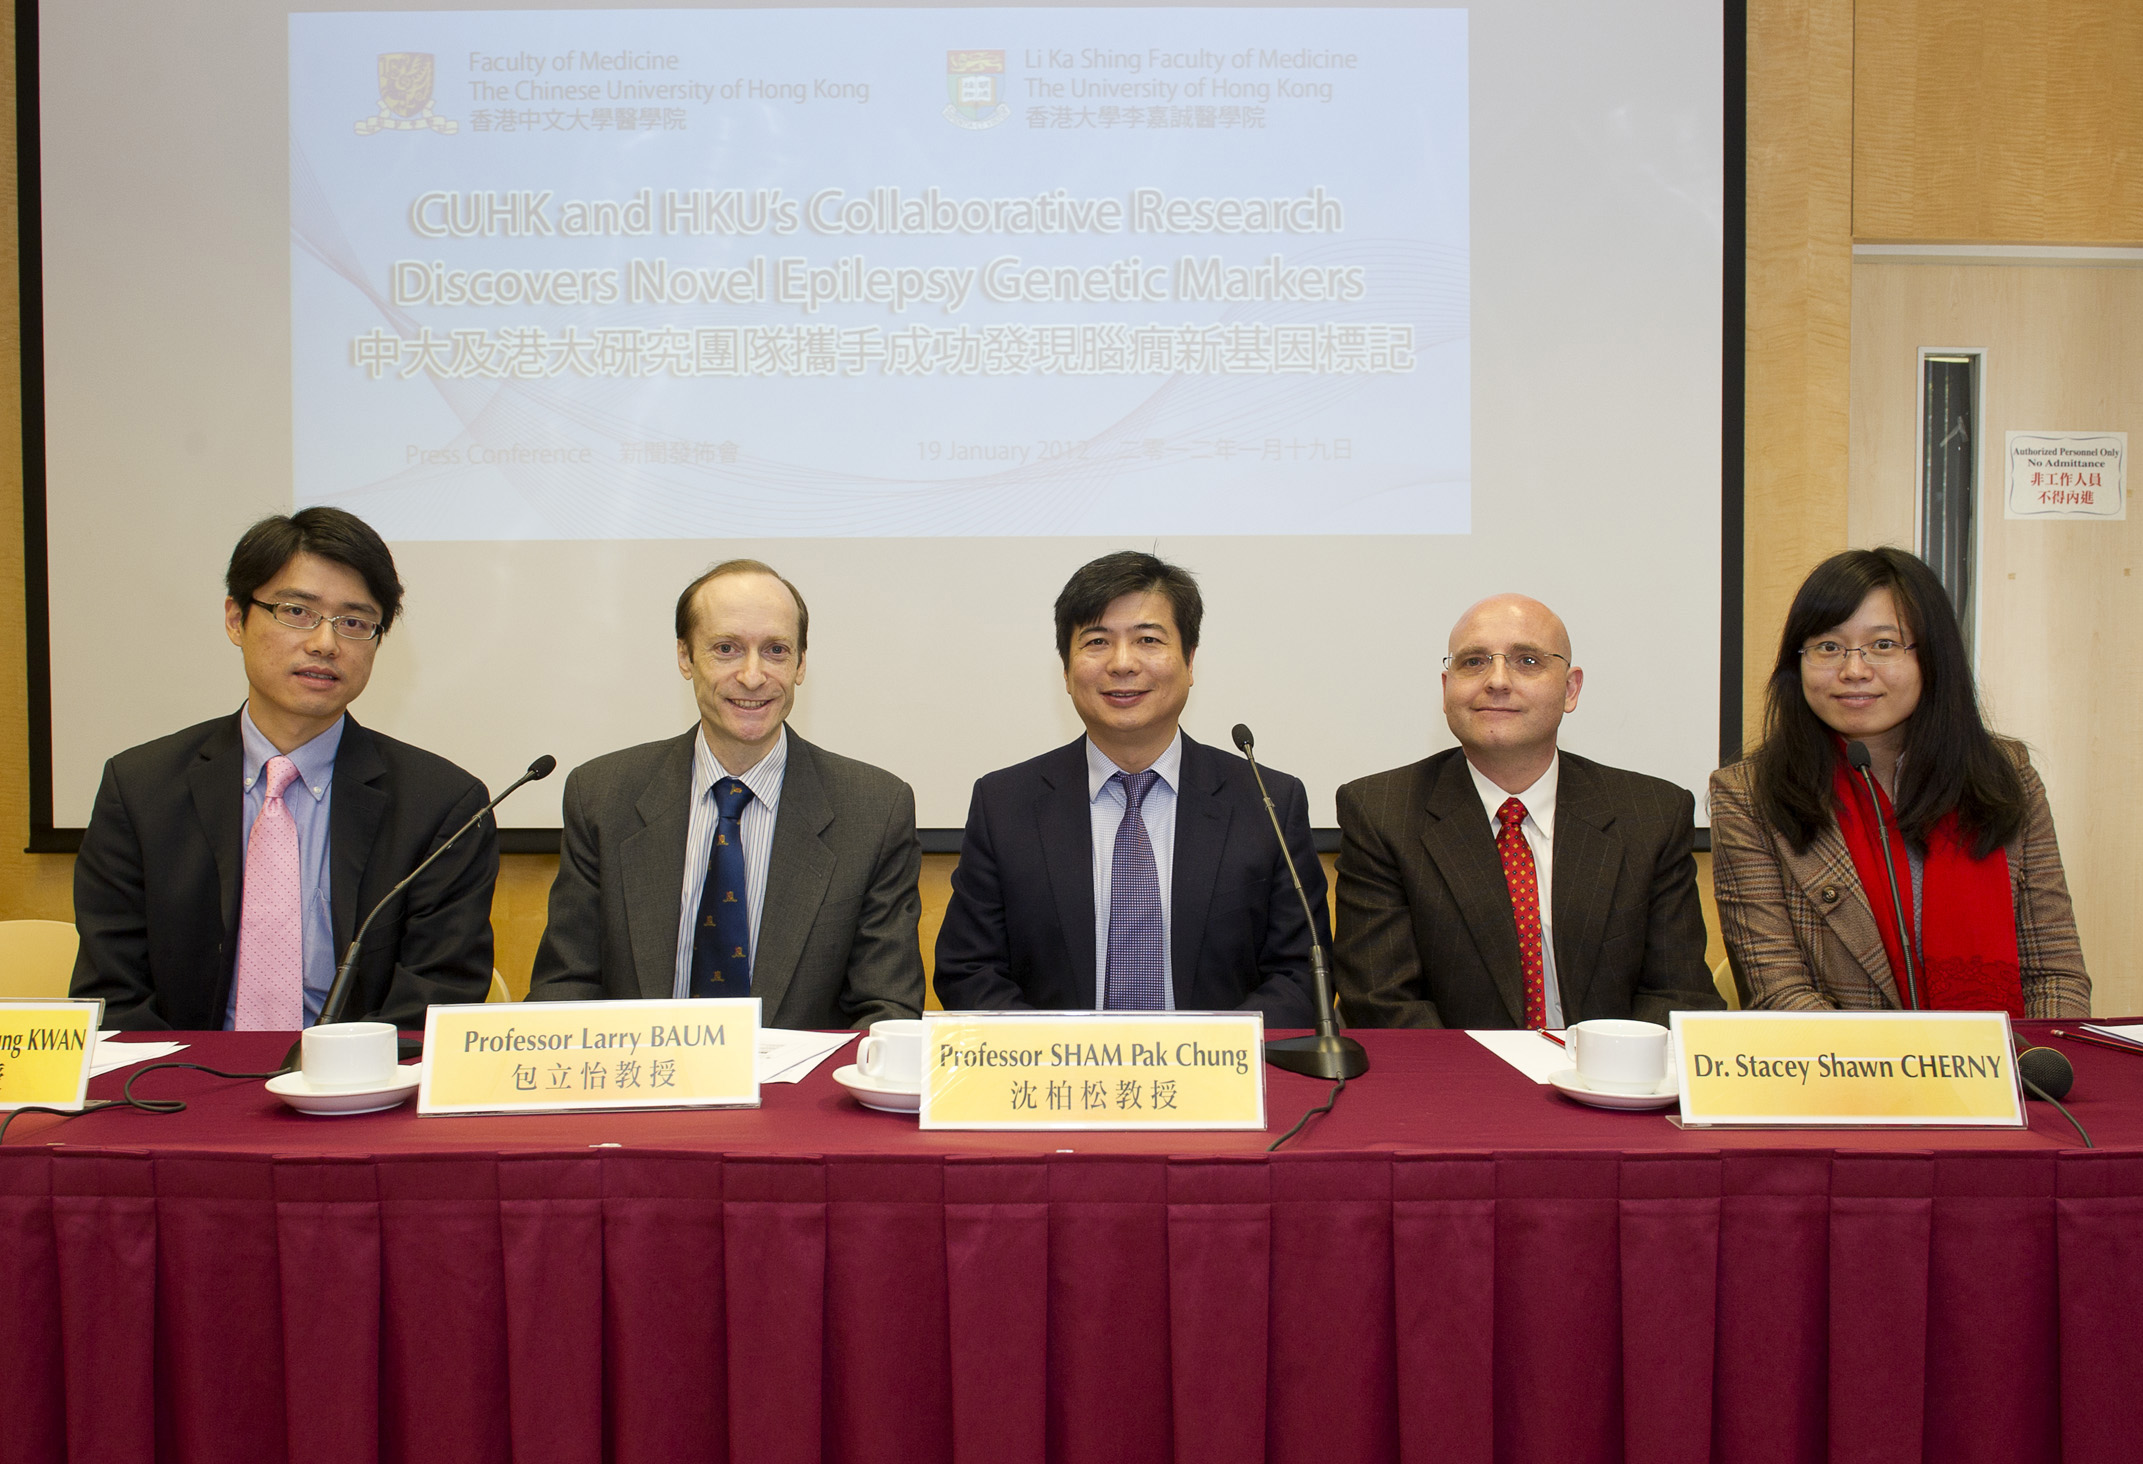 from left) Dr. Patrick KWAN, Honorary Clinical Associate Professor, Department of Medicine and Therapeutics, CUHK; Prof. Larry BAUM, Associate Professor, School of Pharmacy, CUHK; Prof. SHAM Pak Chung, Head of Department of Psychiatry, Li Ka Shing Faculty of Medicine, HKU; Dr. Stacey CHERNY, Assistant Professor, Department of Psychiatry, Li Ka Shing Faculty of Medicine, HKU; and Ms. GUO Youling, PhD Student, Department of Psychiatry, Li Ka Shing Faculty of Medicine, HKU